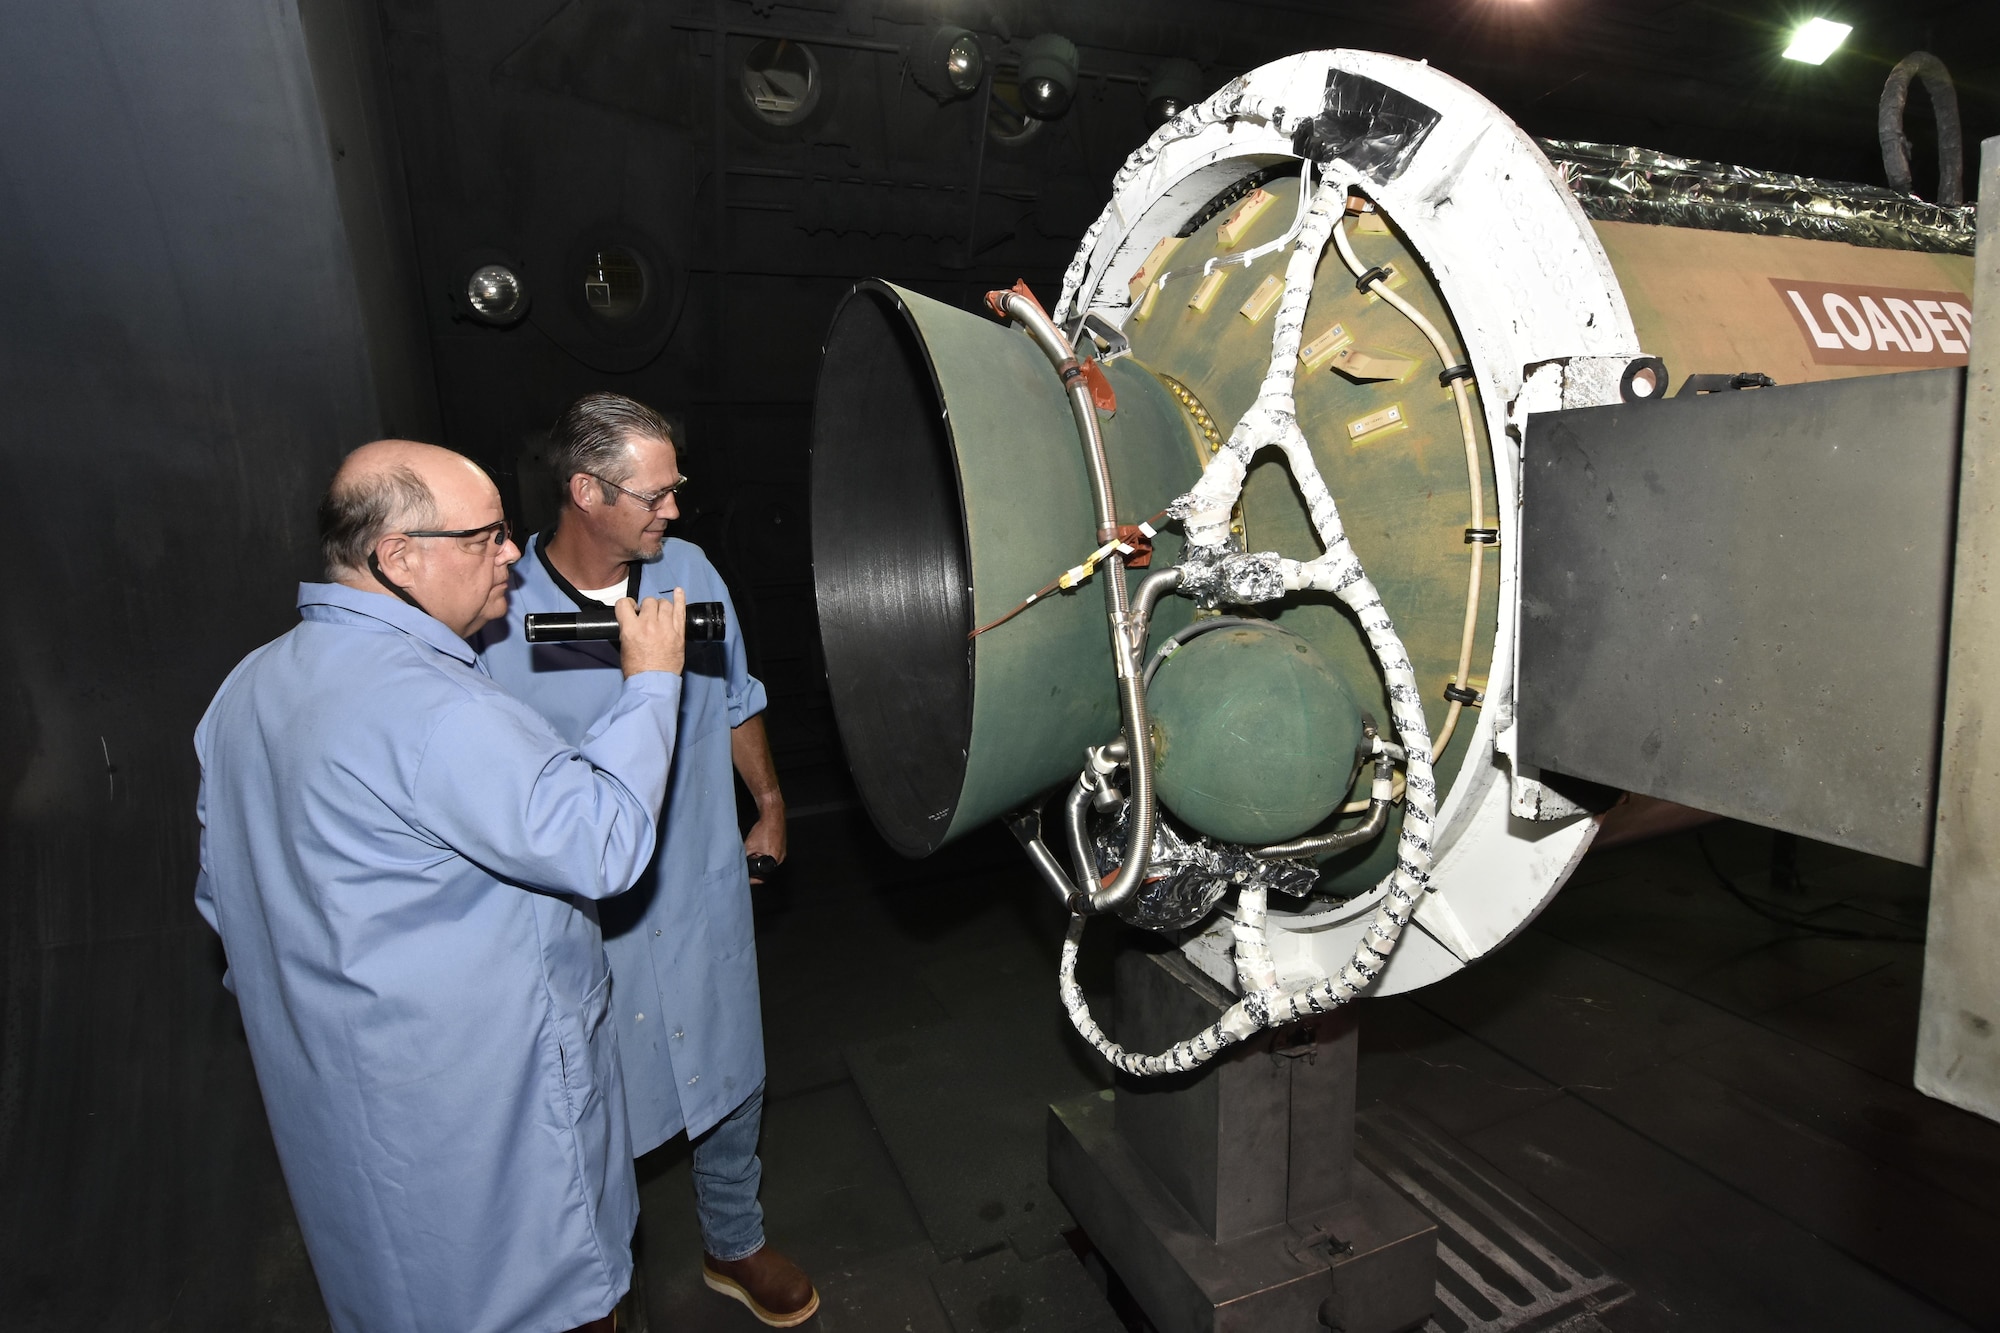 Members of the J-6 Large Rocket Motor Test Facility test team perform an inspection of the solid propellant rocket motor for the Minuteman III intercontinental ballistic missile prior to testing at the facility. (U.S. Air Force photo/Rick Goodfriend)